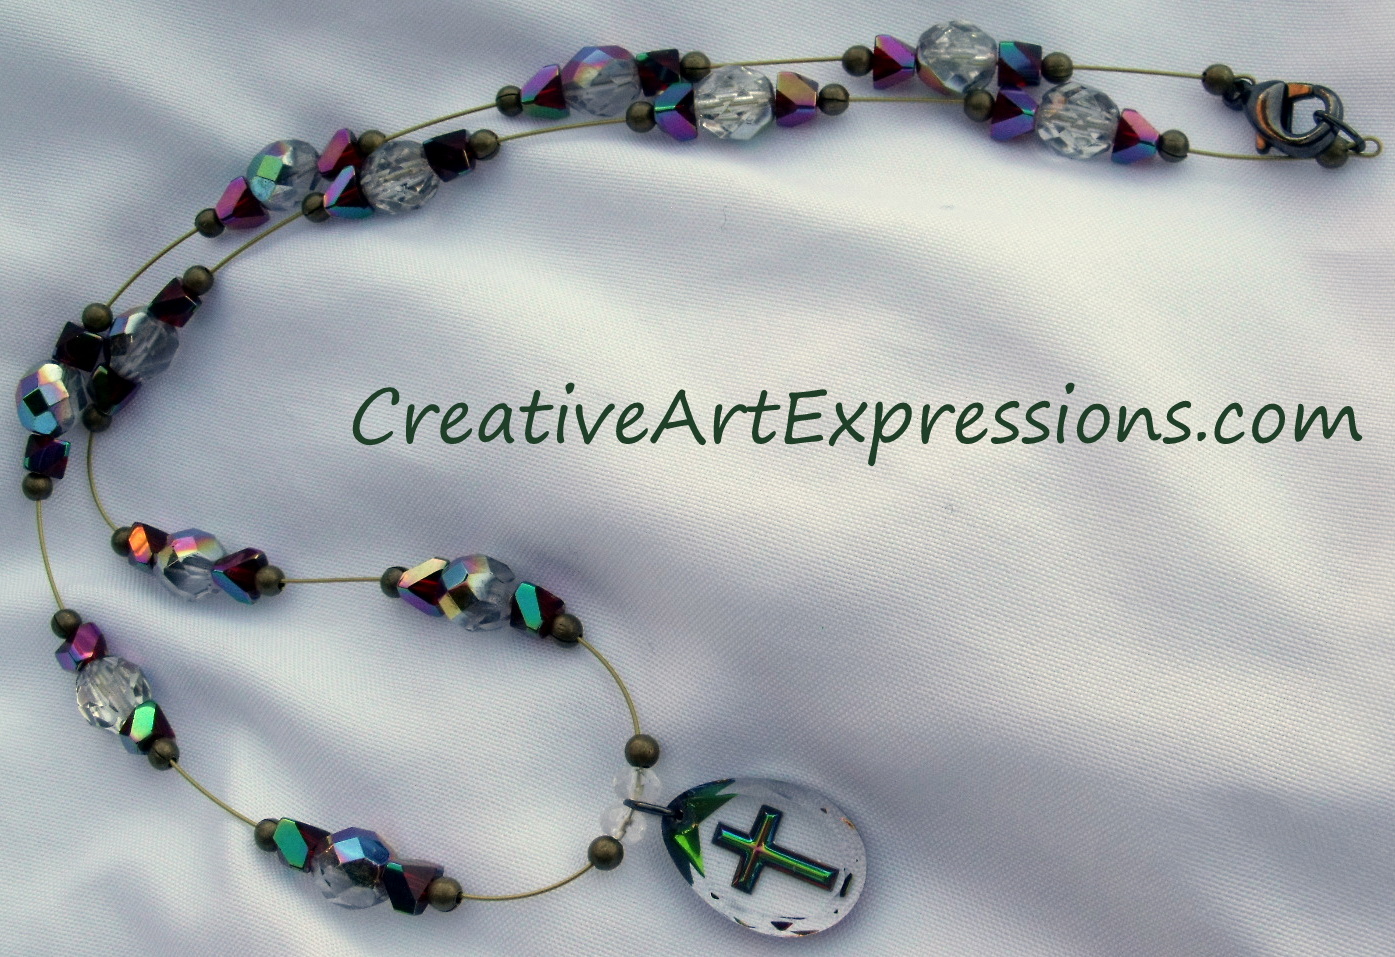 Creative Art Expressions Handmade Crystal Cross Necklace Jewelry Design